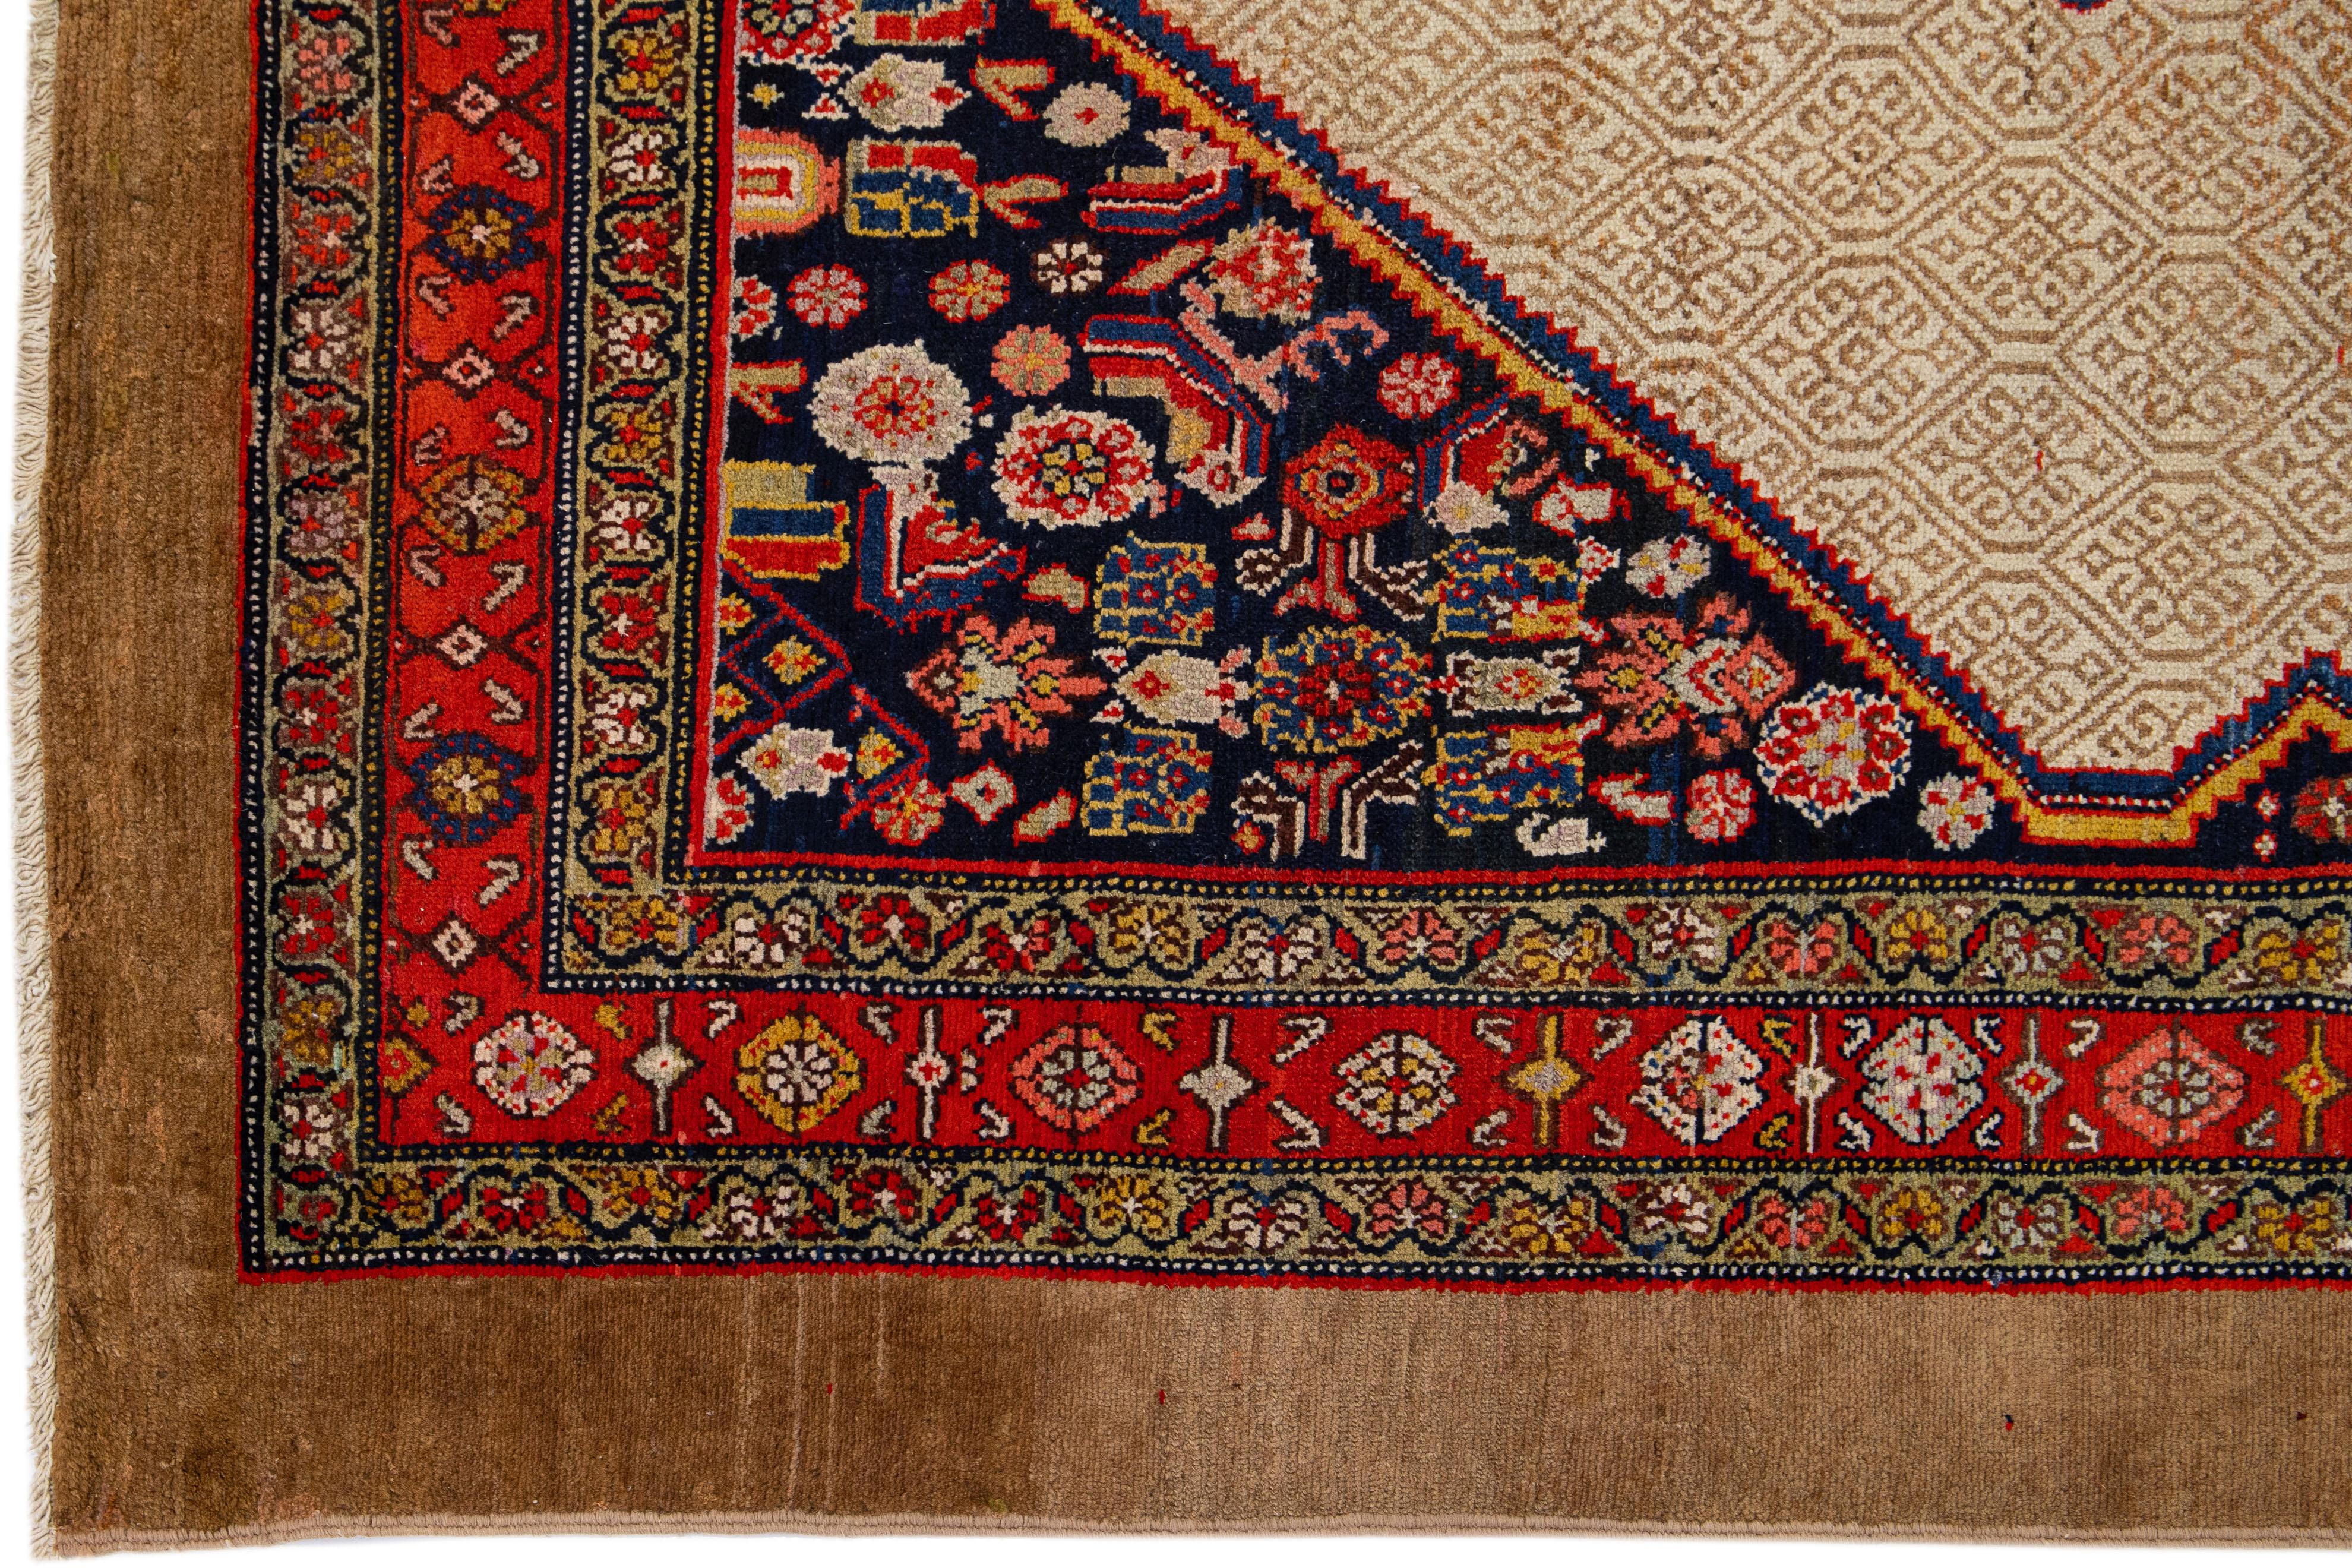 1900s Persian Hamadan Gallery Wool Rug with Multicolor Medallion Design  In Excellent Condition For Sale In Norwalk, CT